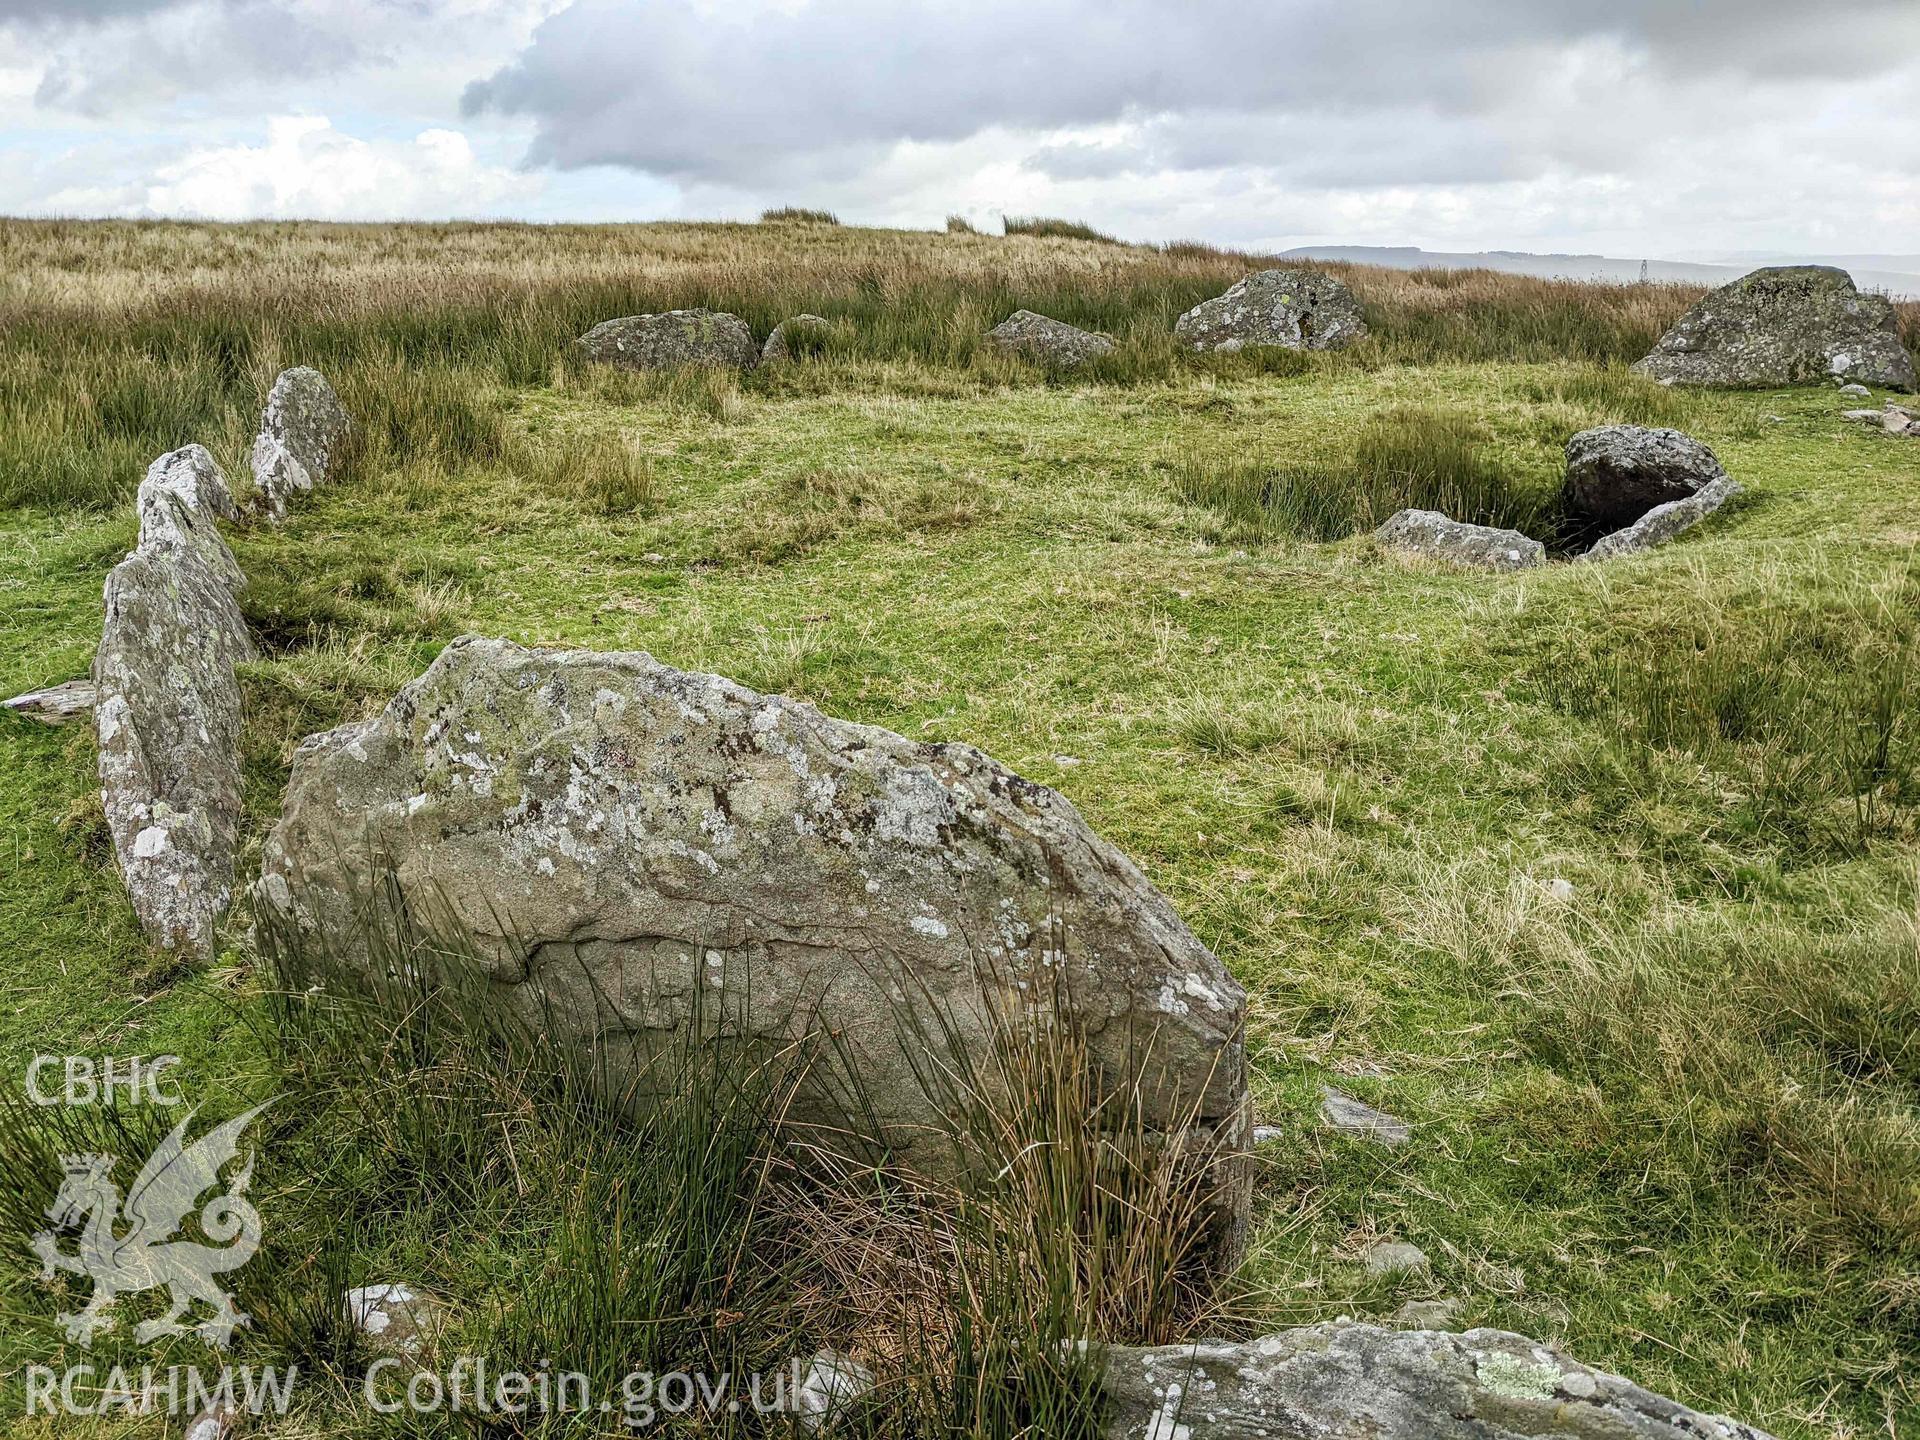 Carn Llechart ring cairn. Part of a photographic survey of Carn Llechart, Pontardawe, conducted by Meilyr Powel of RCAHMW on 1st October 2022.